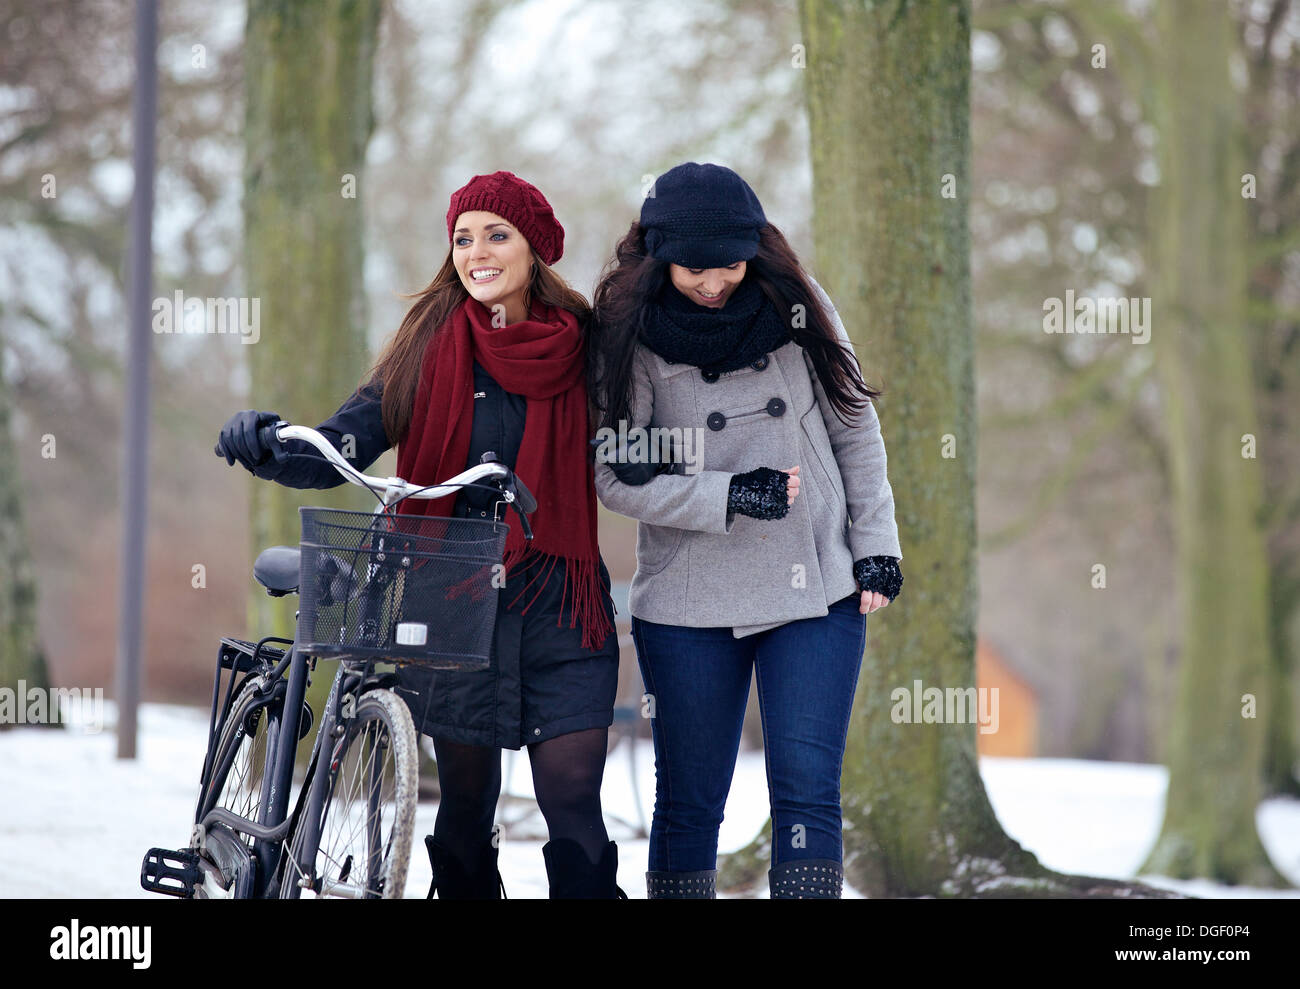 Two beautiful women having fun together on a chilly day at the park Stock Photo